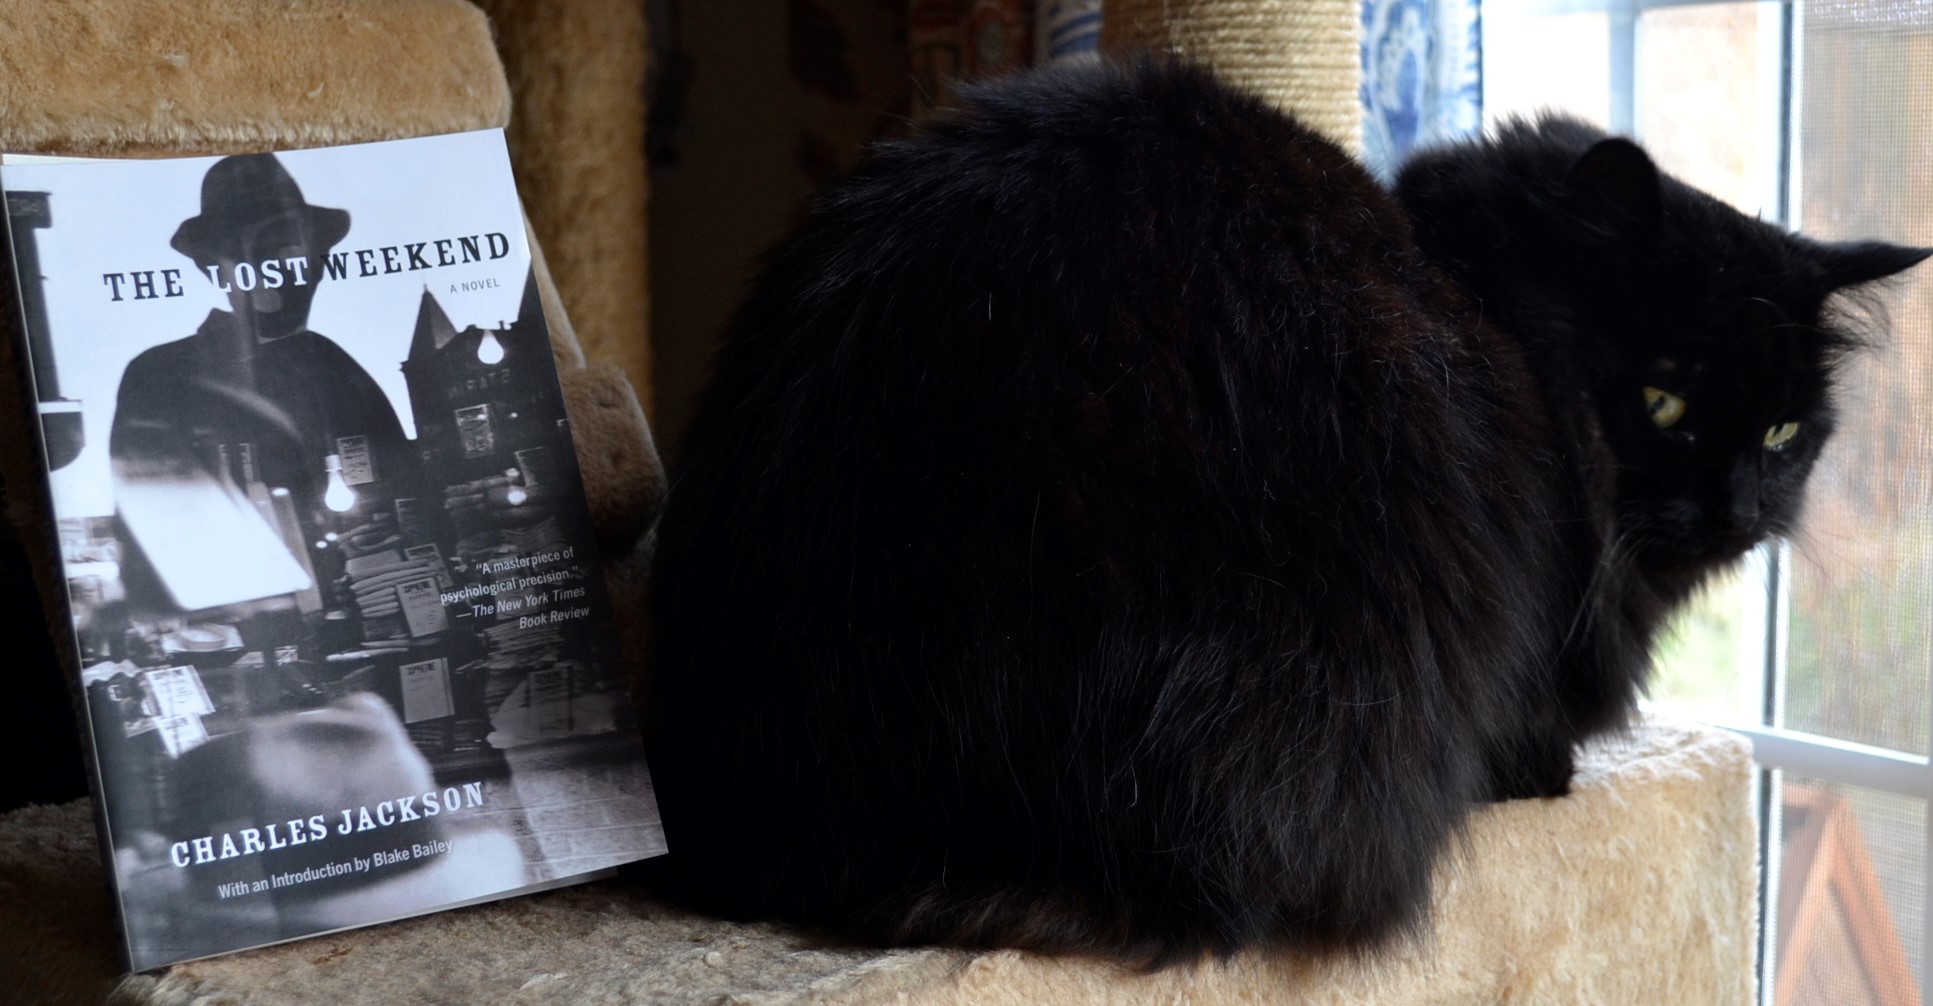 A black fluffy cat looks over its shoulder, beside The Lost Weekend.